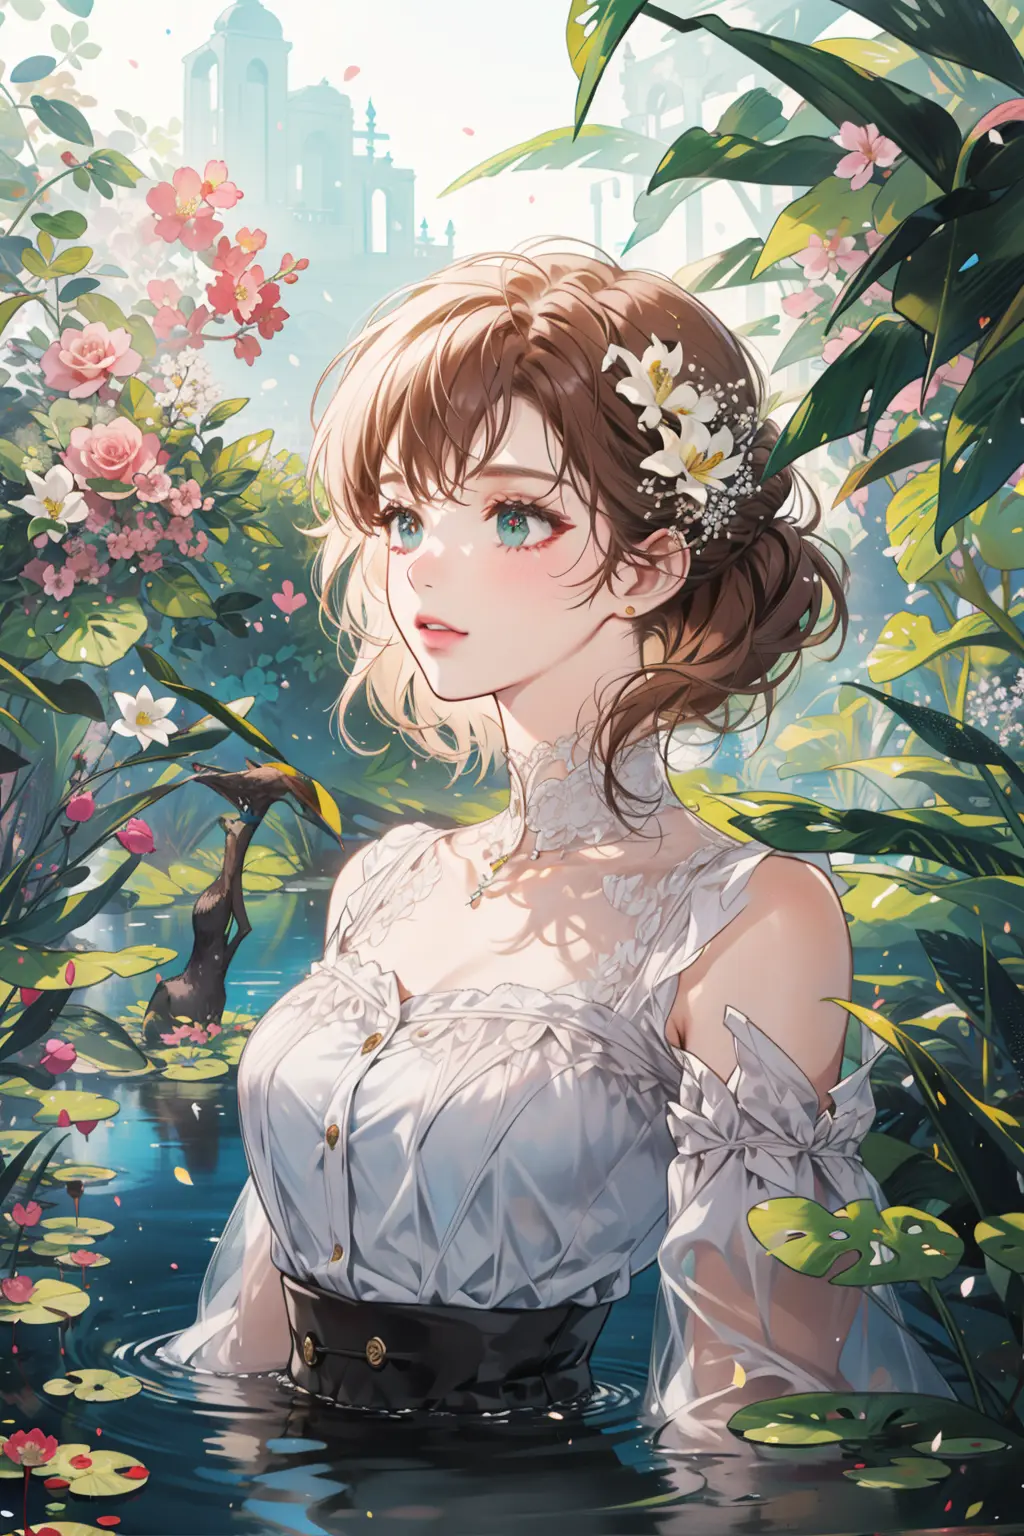 (masterpiece:1.2, best quality), (real picture, intricate details), (1lady, solo, upper body:1.2), big  colorful garden, with blooming flowers of all shapes and sizes. The air is thick with the sweet fragrance of roses and jasmine. A small pond shimmers in the sunlight, its surface dotted with lily pads. In the distance, a pair of peacocks strut about, their feathers glistening in the sun. Bees buzz about, pollinating the flowers and adding to the lively energy of the scene